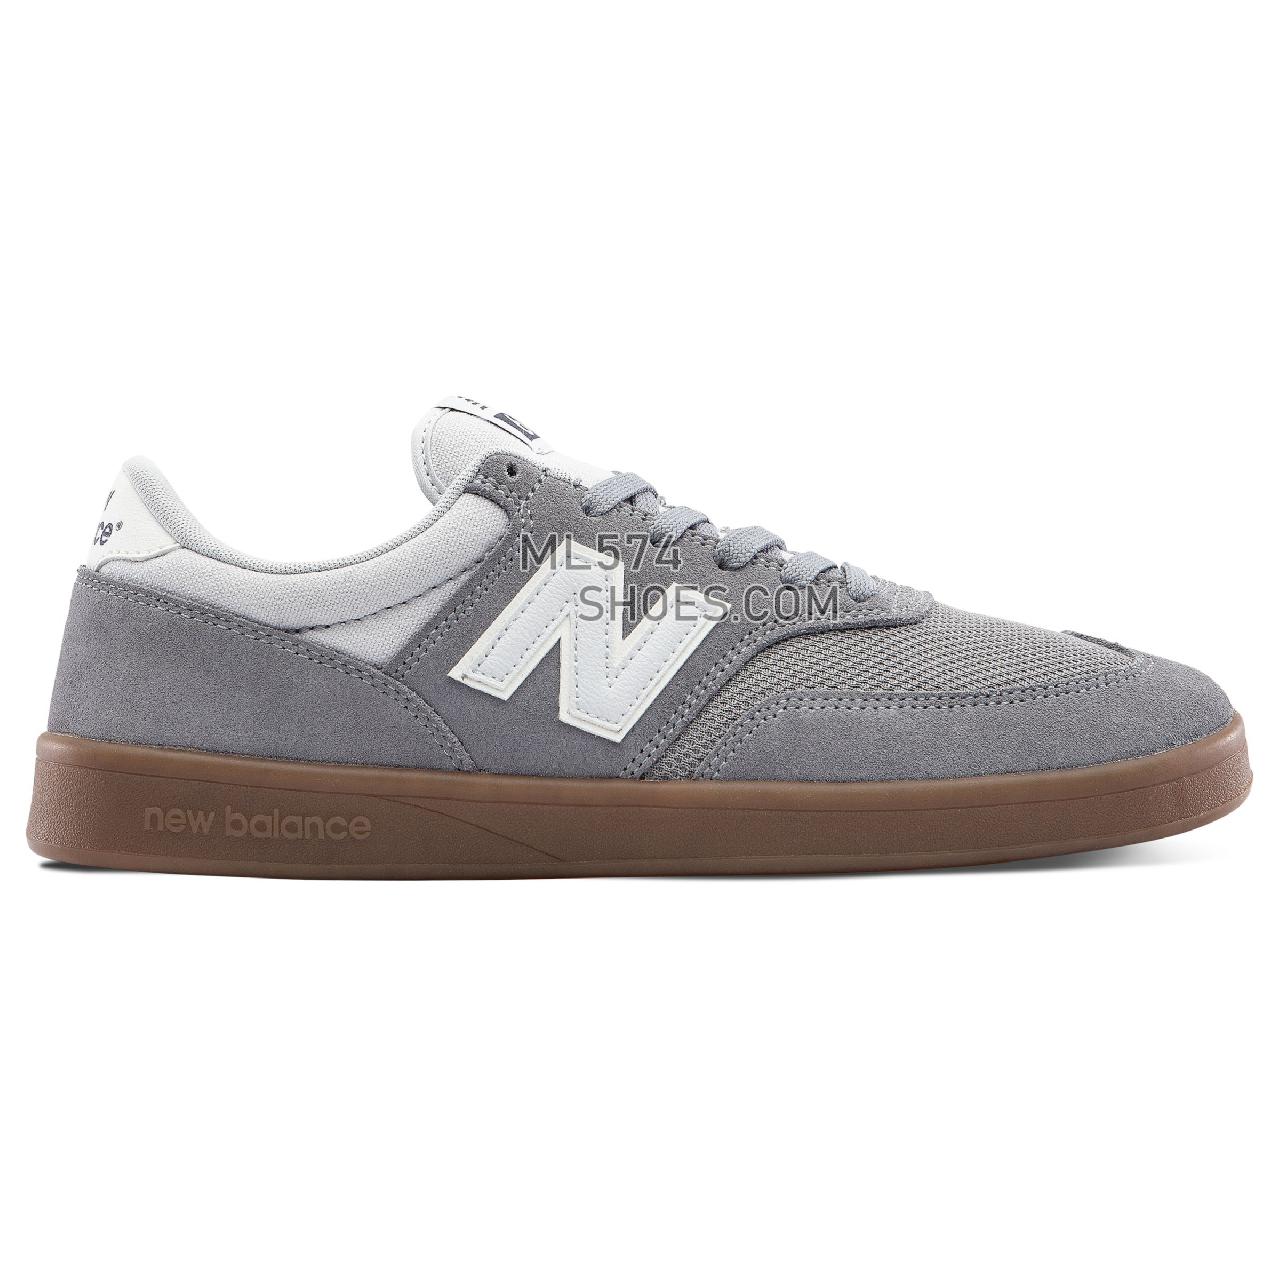 New Balance 617 - Men's 617 - Classic Grey with White - AM617GBG